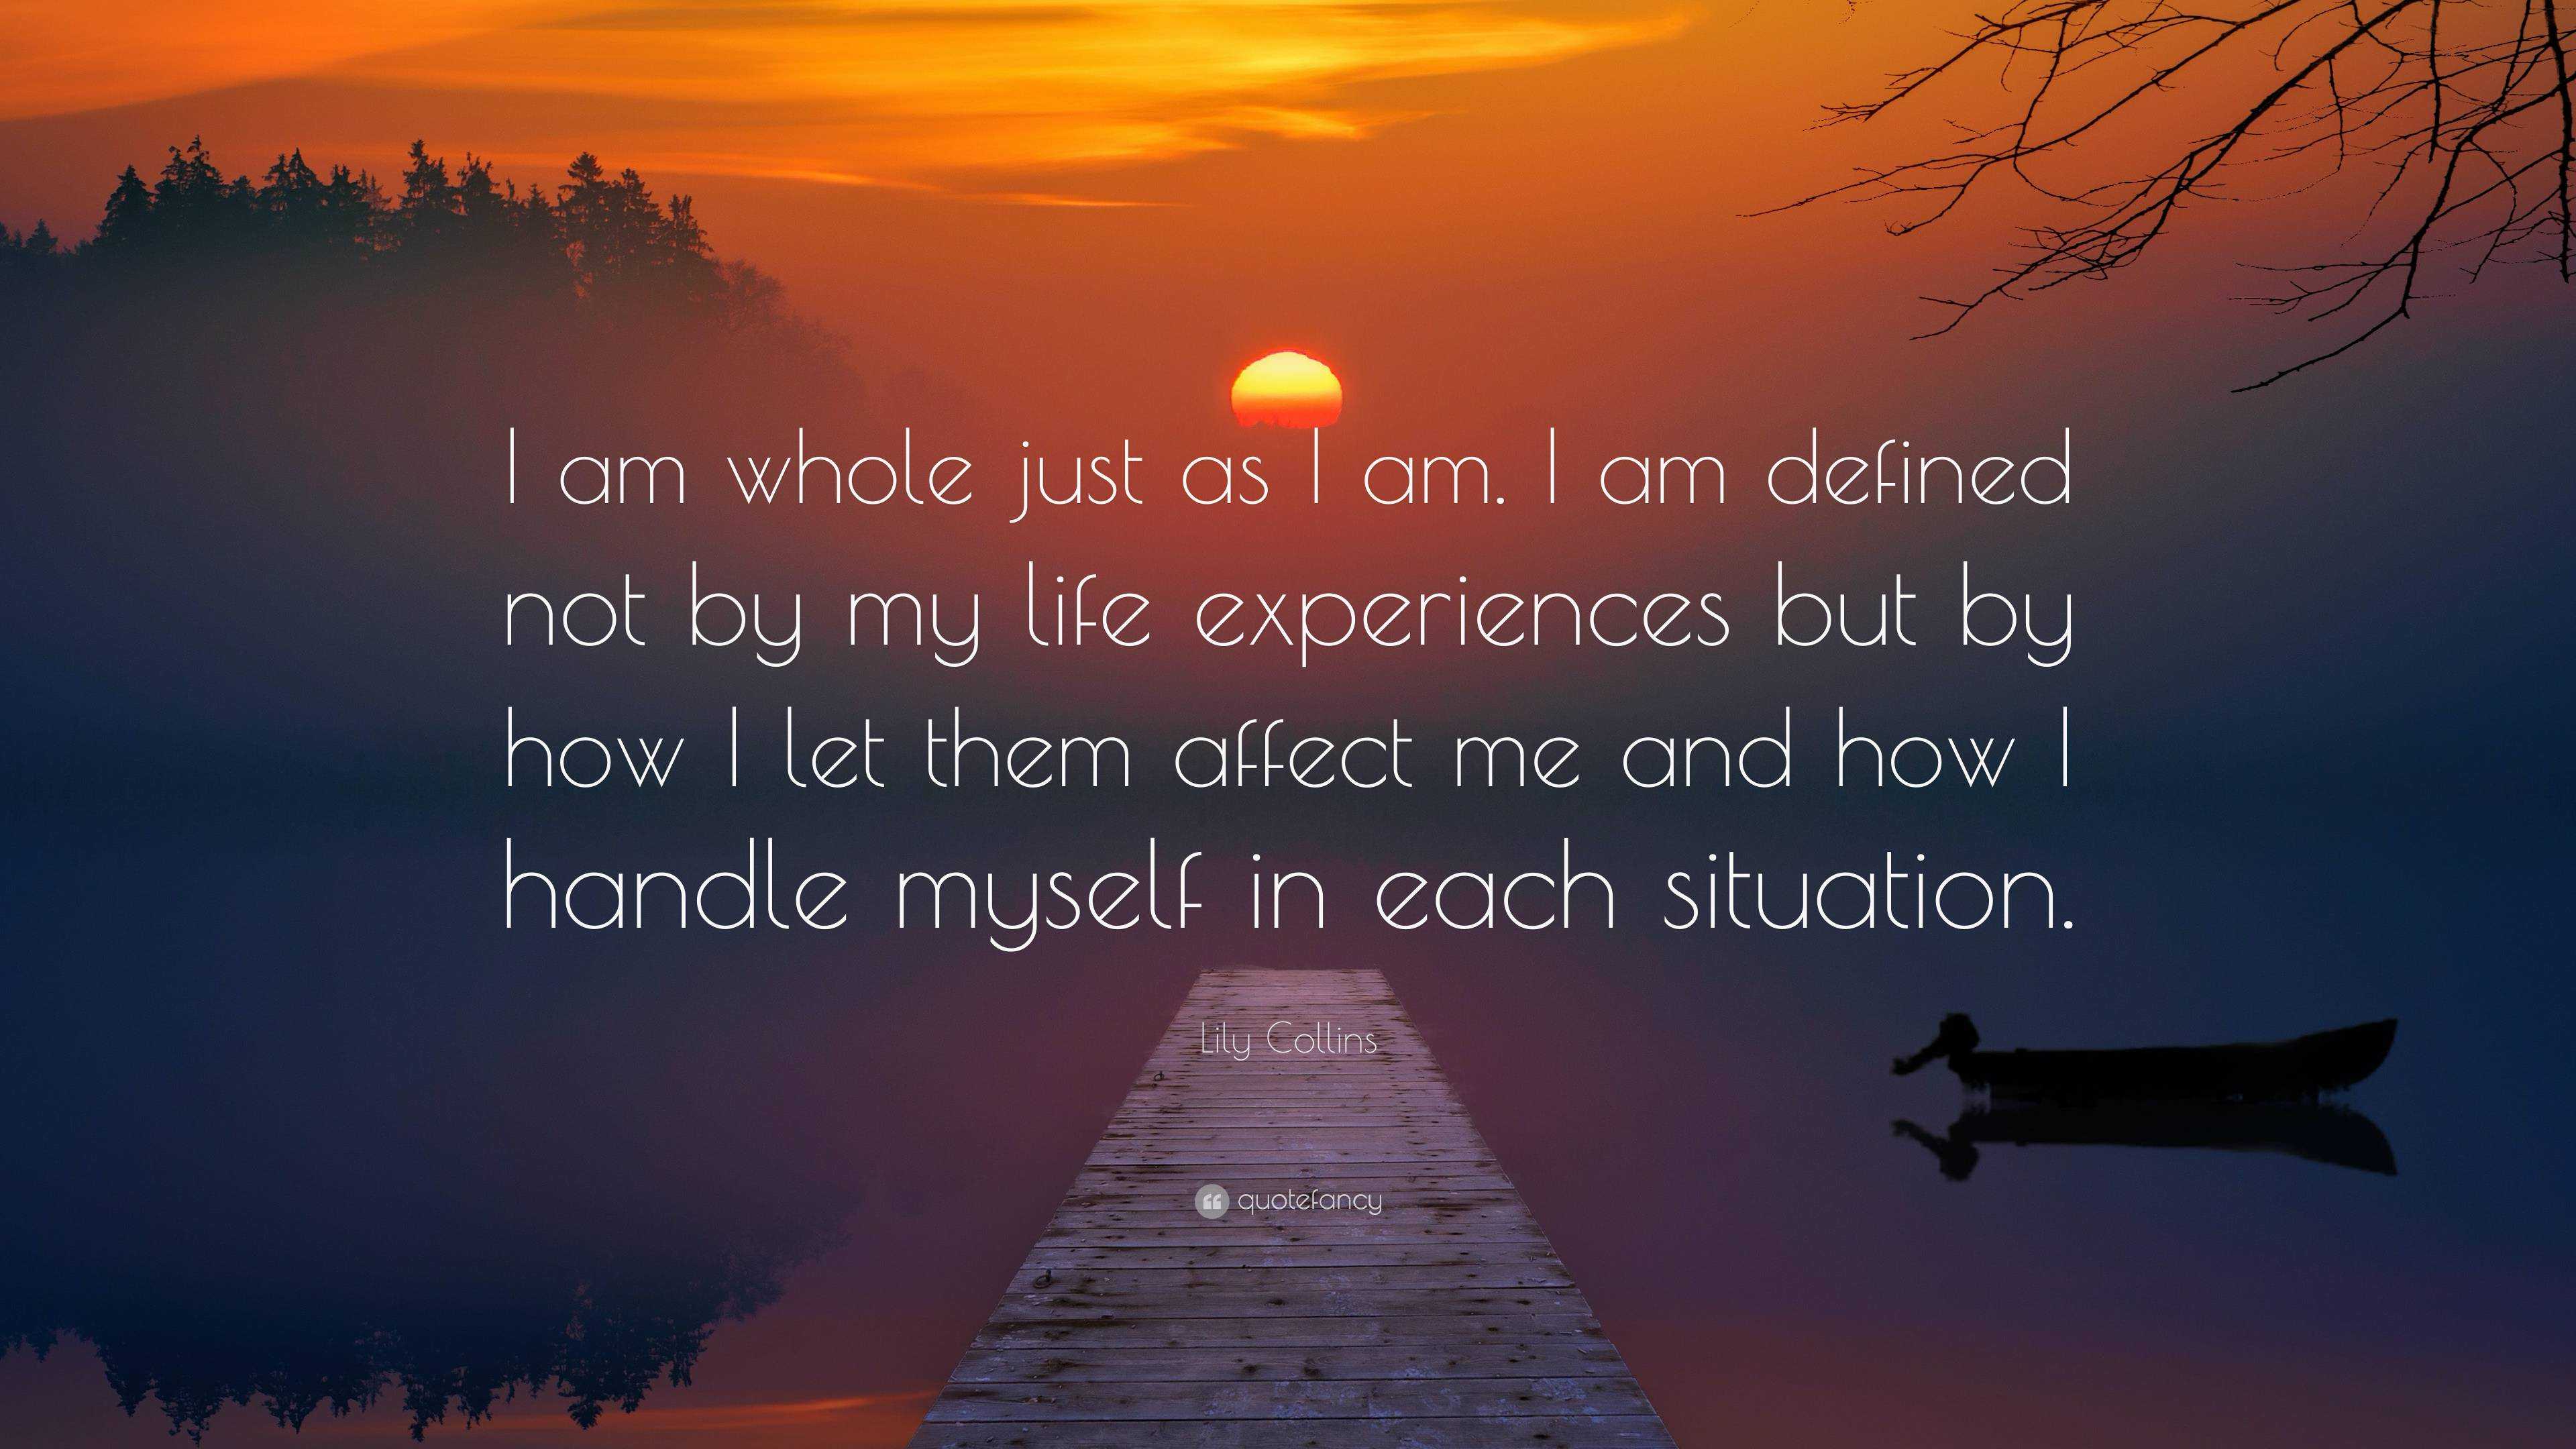 Lily Collins Quote: “I am whole just as I am. I am defined not by my ...